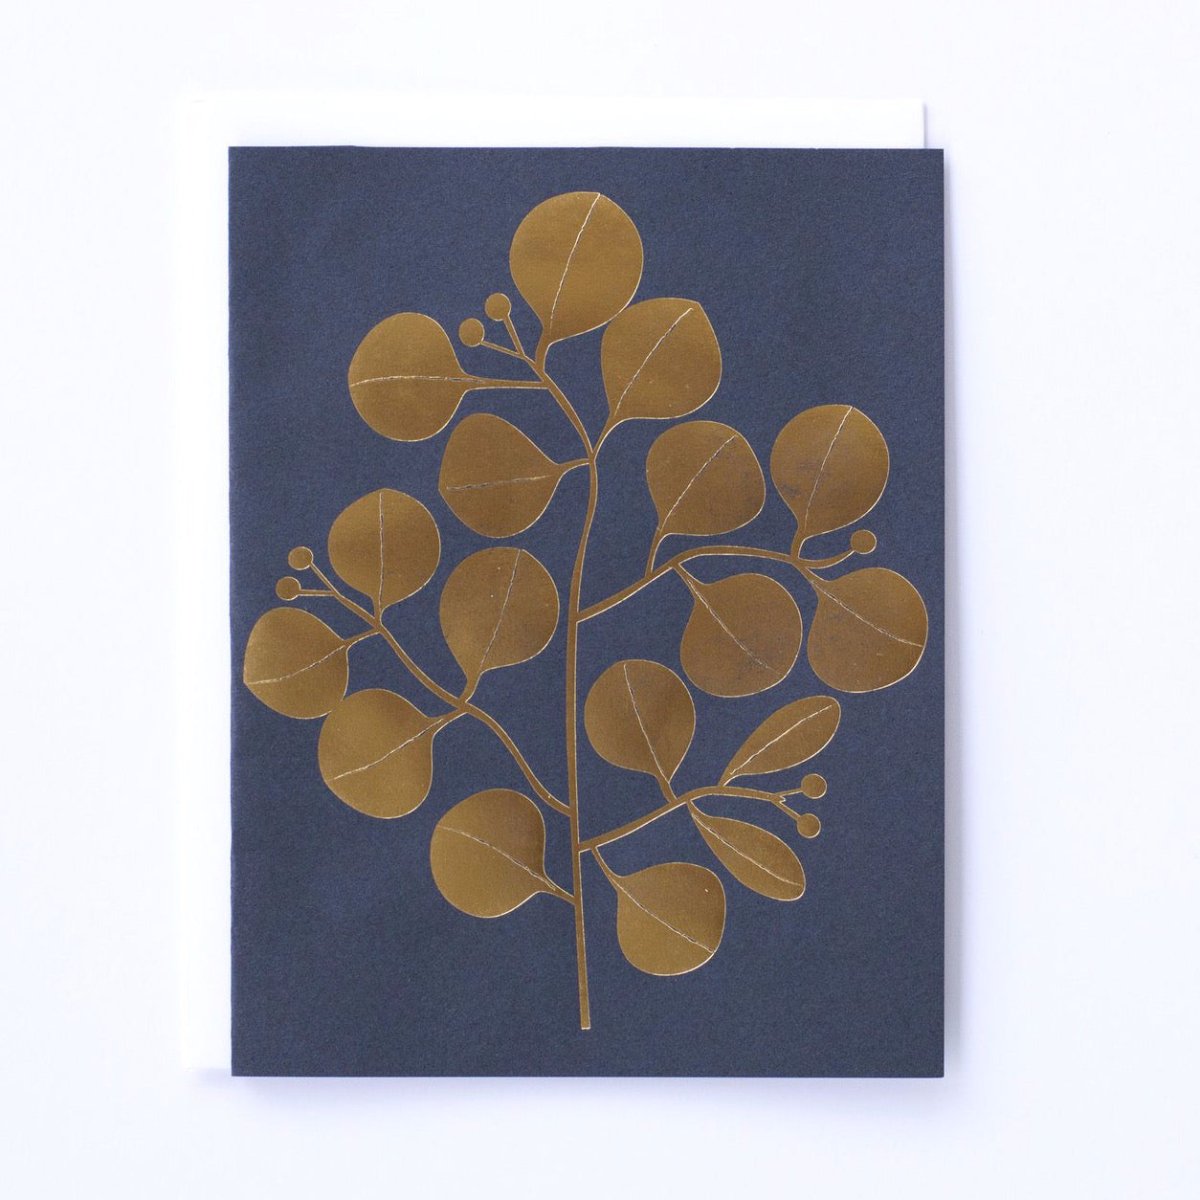 Navy blue card with  leaves foil printed in gold. Made with recycled paper by Banquet Atelier in Vancouver, British Columbia, Canada.